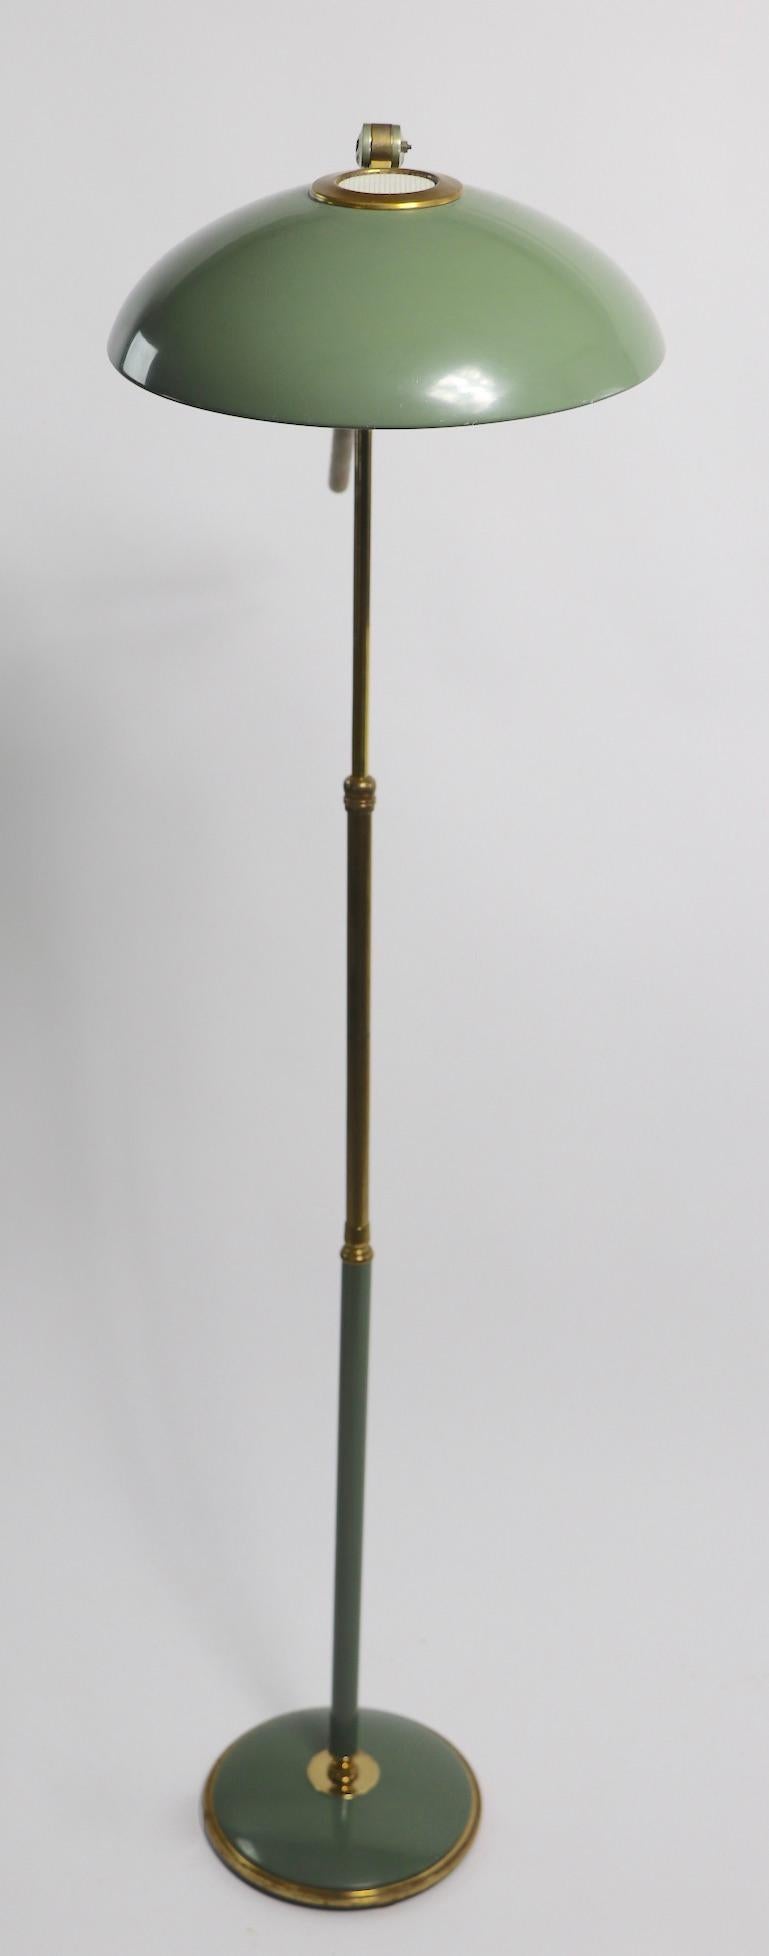 Architectural Articulating Floor Reading Lamp by Thurston for Lightolier 5